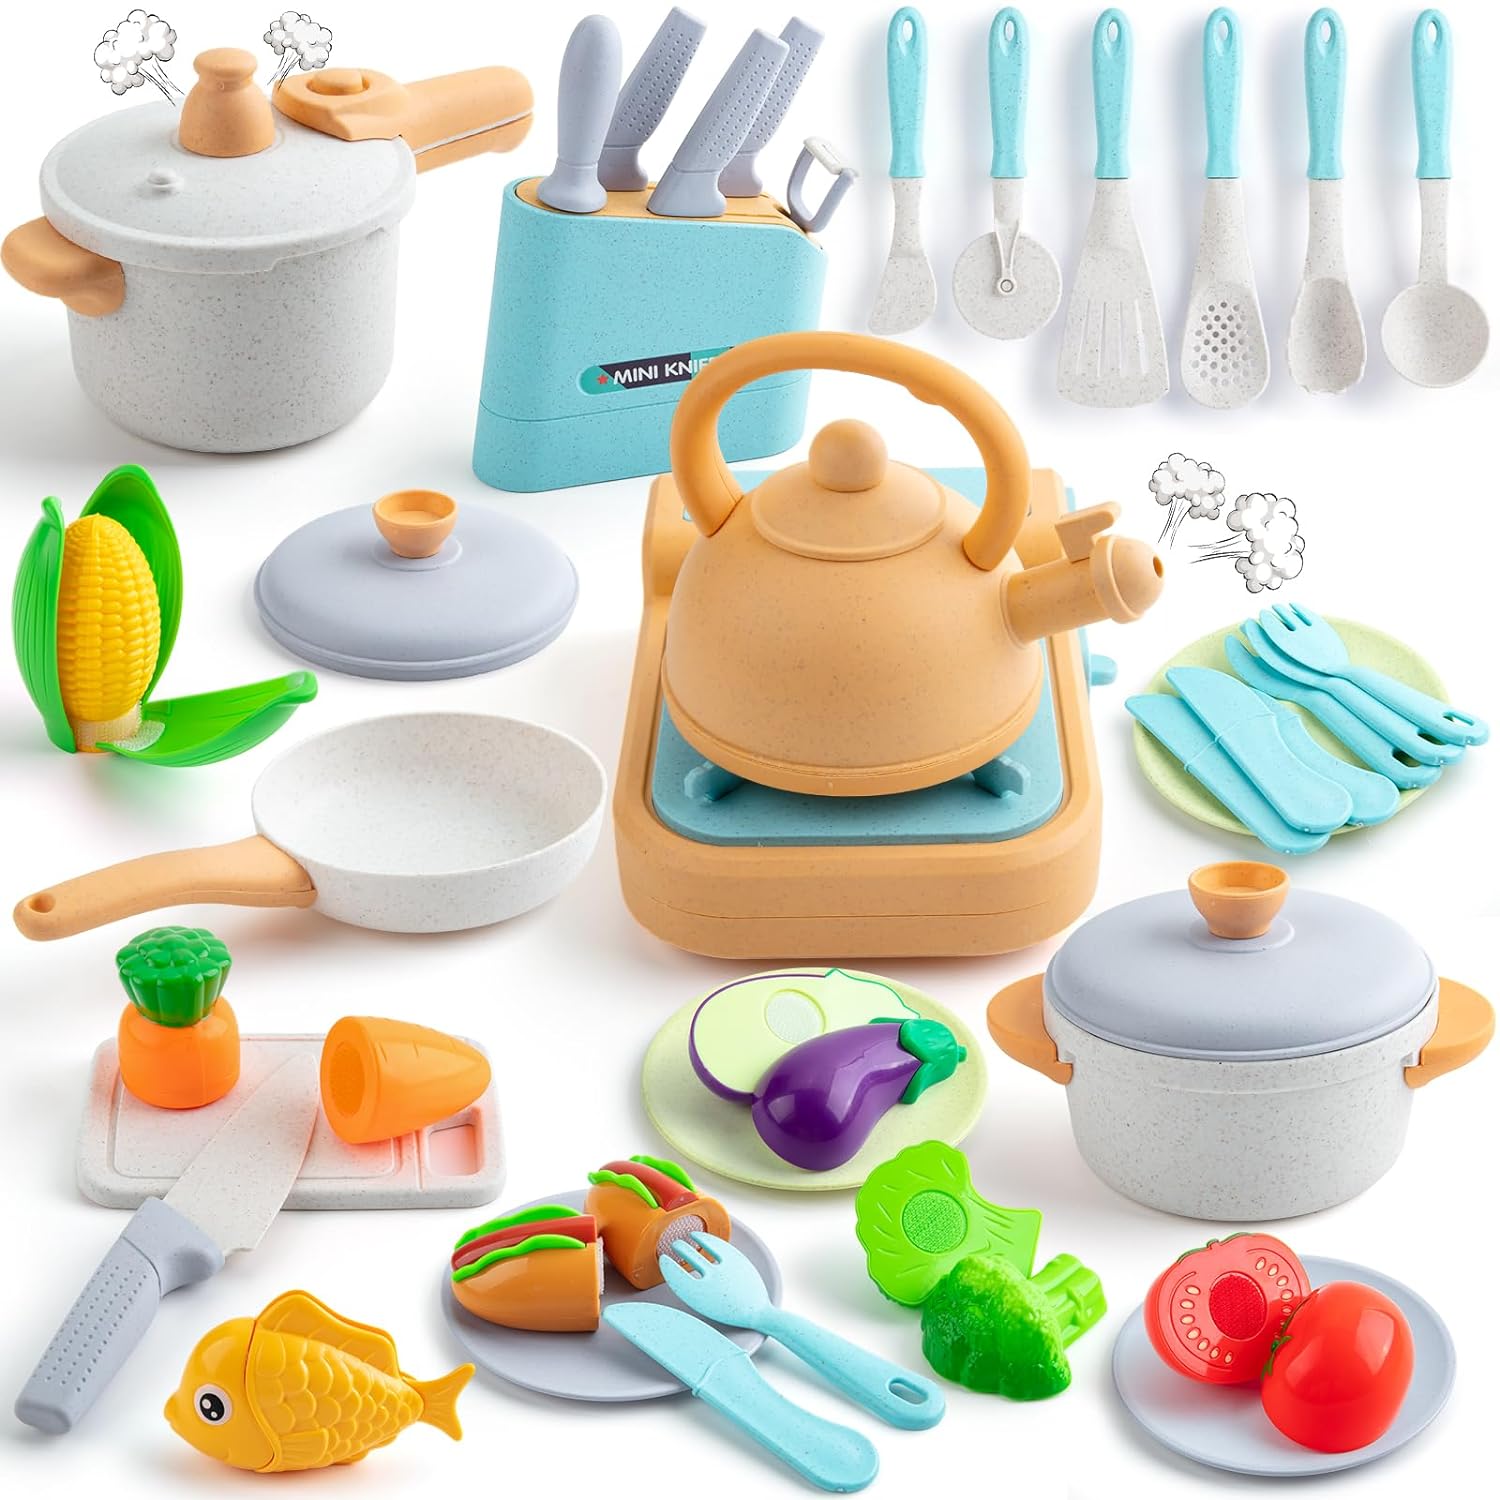 Great Choice Products Pretend Play Kitchen Accessories Set, 44Pcs Kids Kitchen Playset Cookware Toys With Play Pots And Pans, Gas Stove With S…